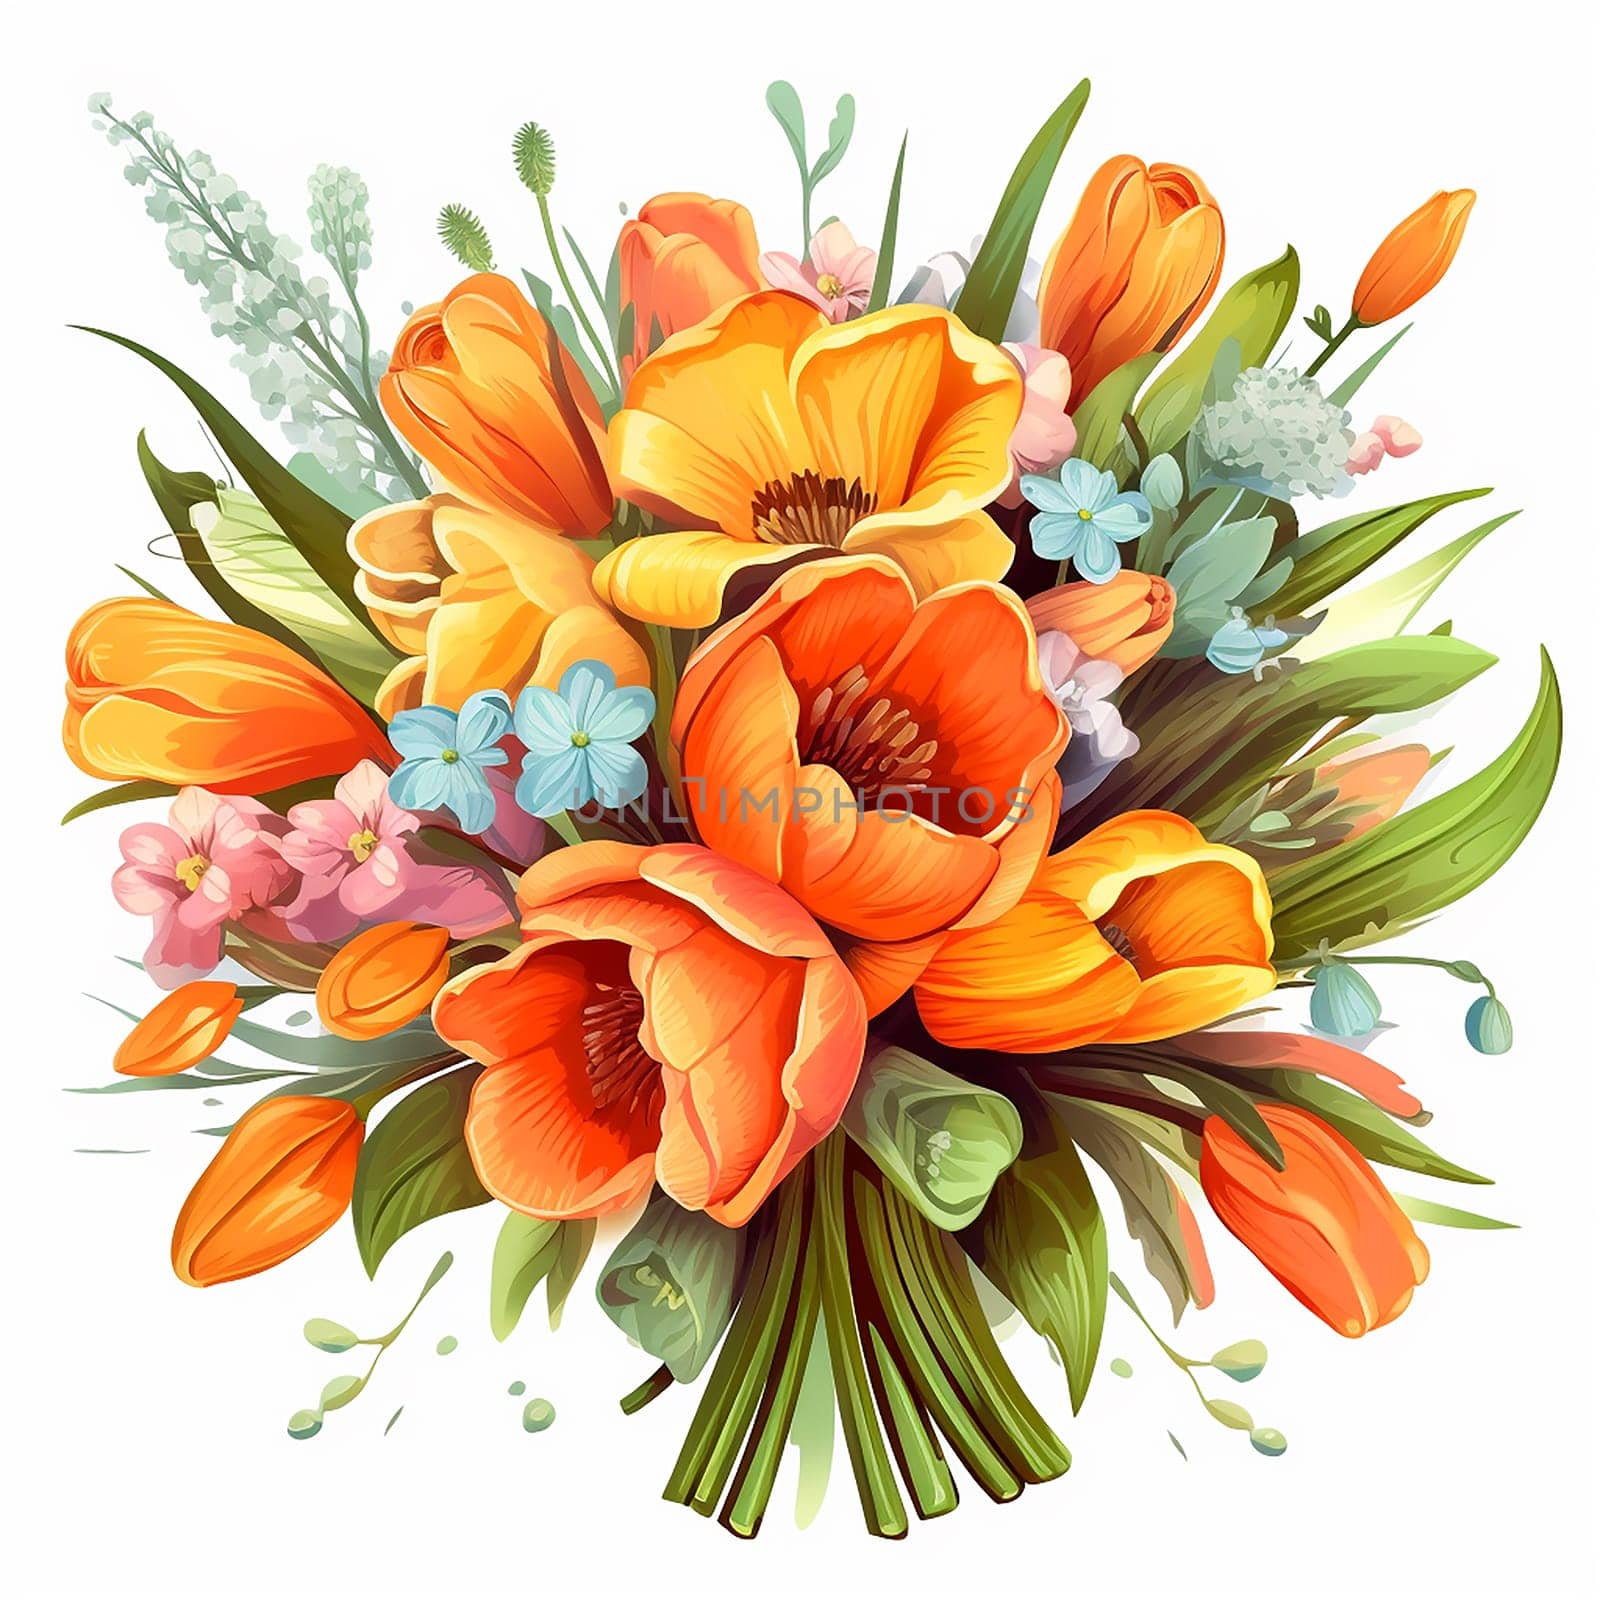 Illustration of a vibrant bouquet with various flowers and foliage.